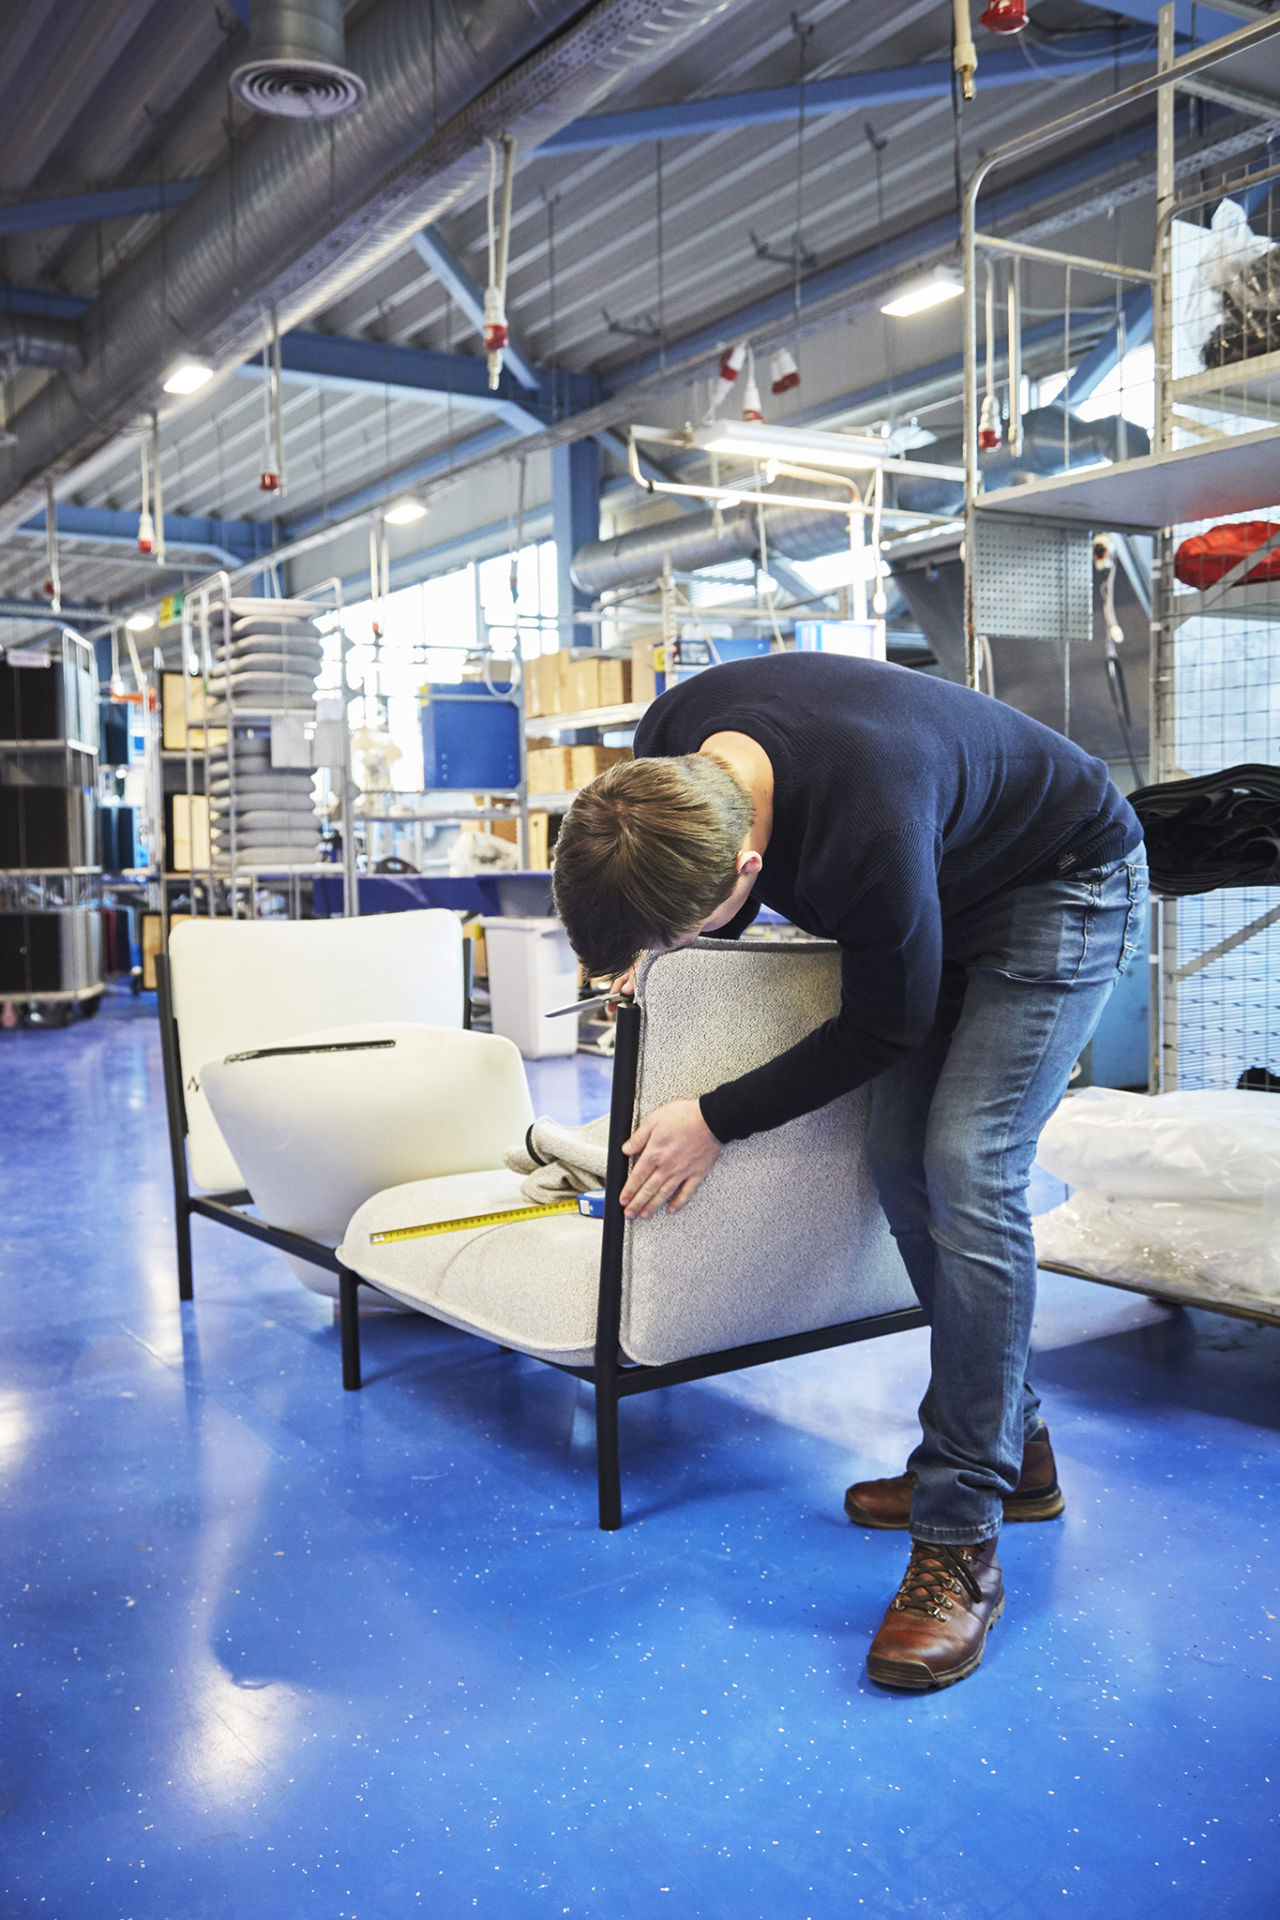 An editorial image from behind the scenes of making Kumo Sofa.